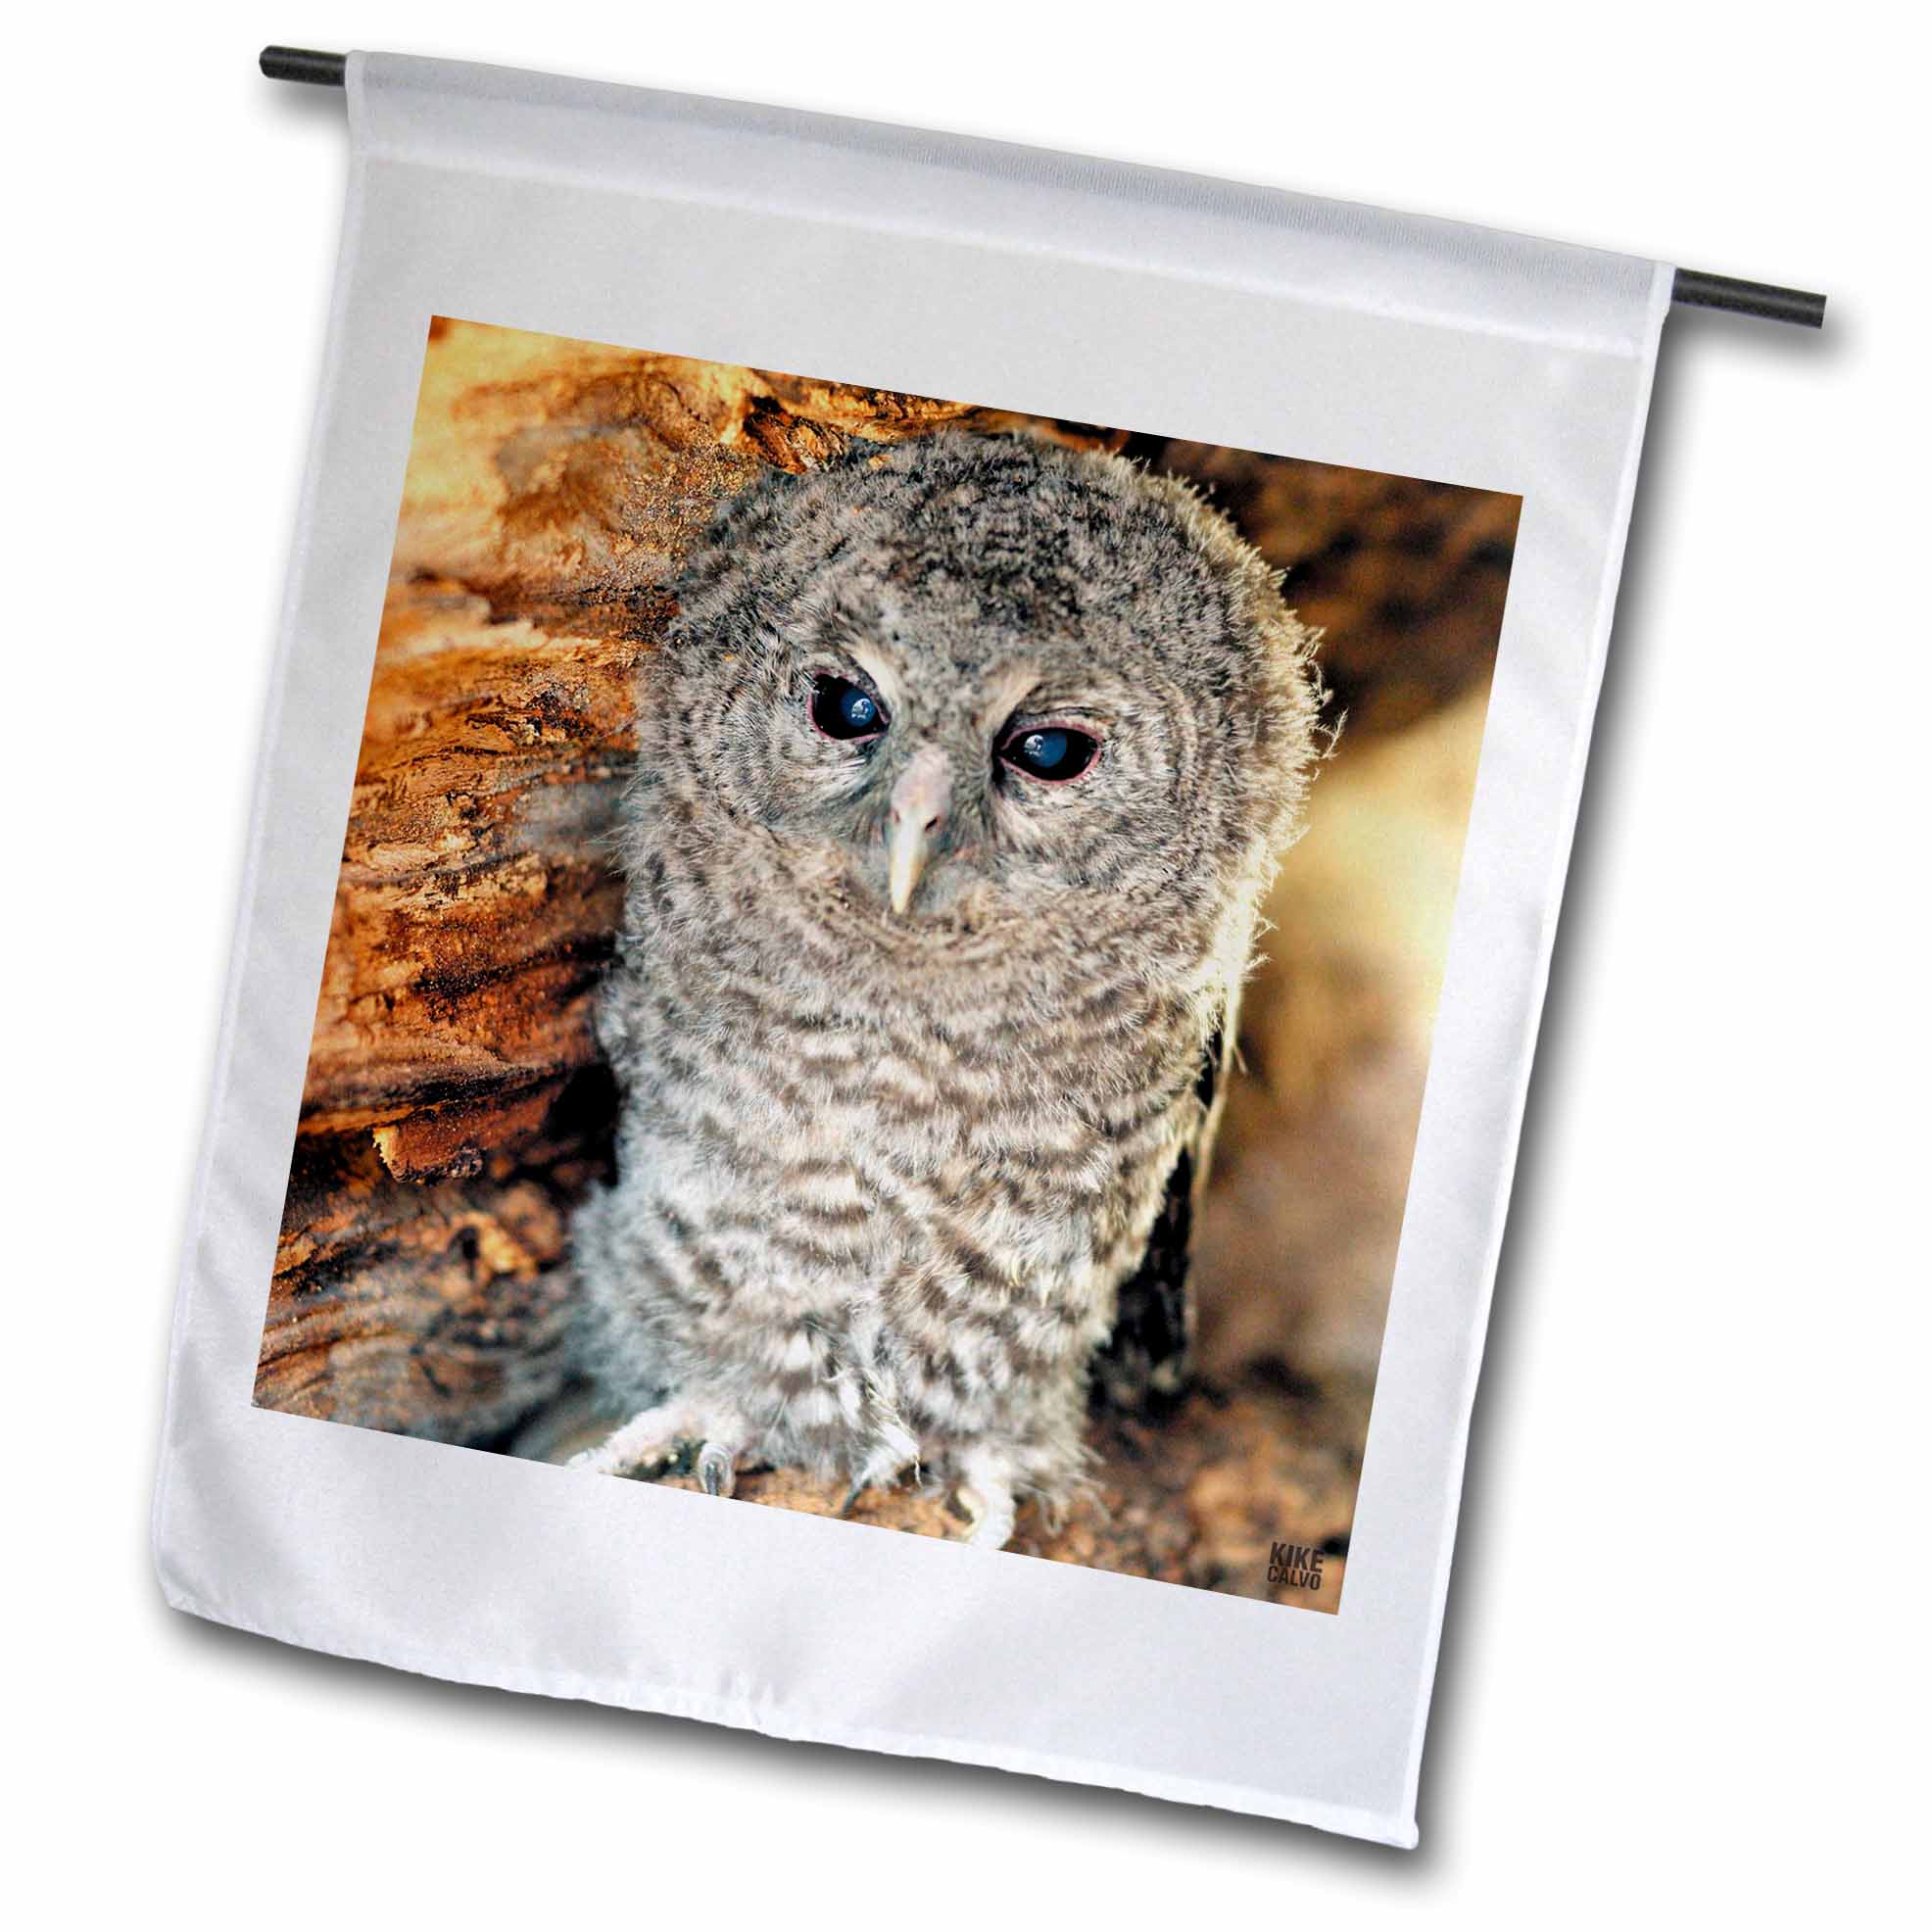 3dRose Tawny Owl, Strix aluco One month young owl Aragon Spain - Garden Flag, 12 by 18-inch - image 1 of 1